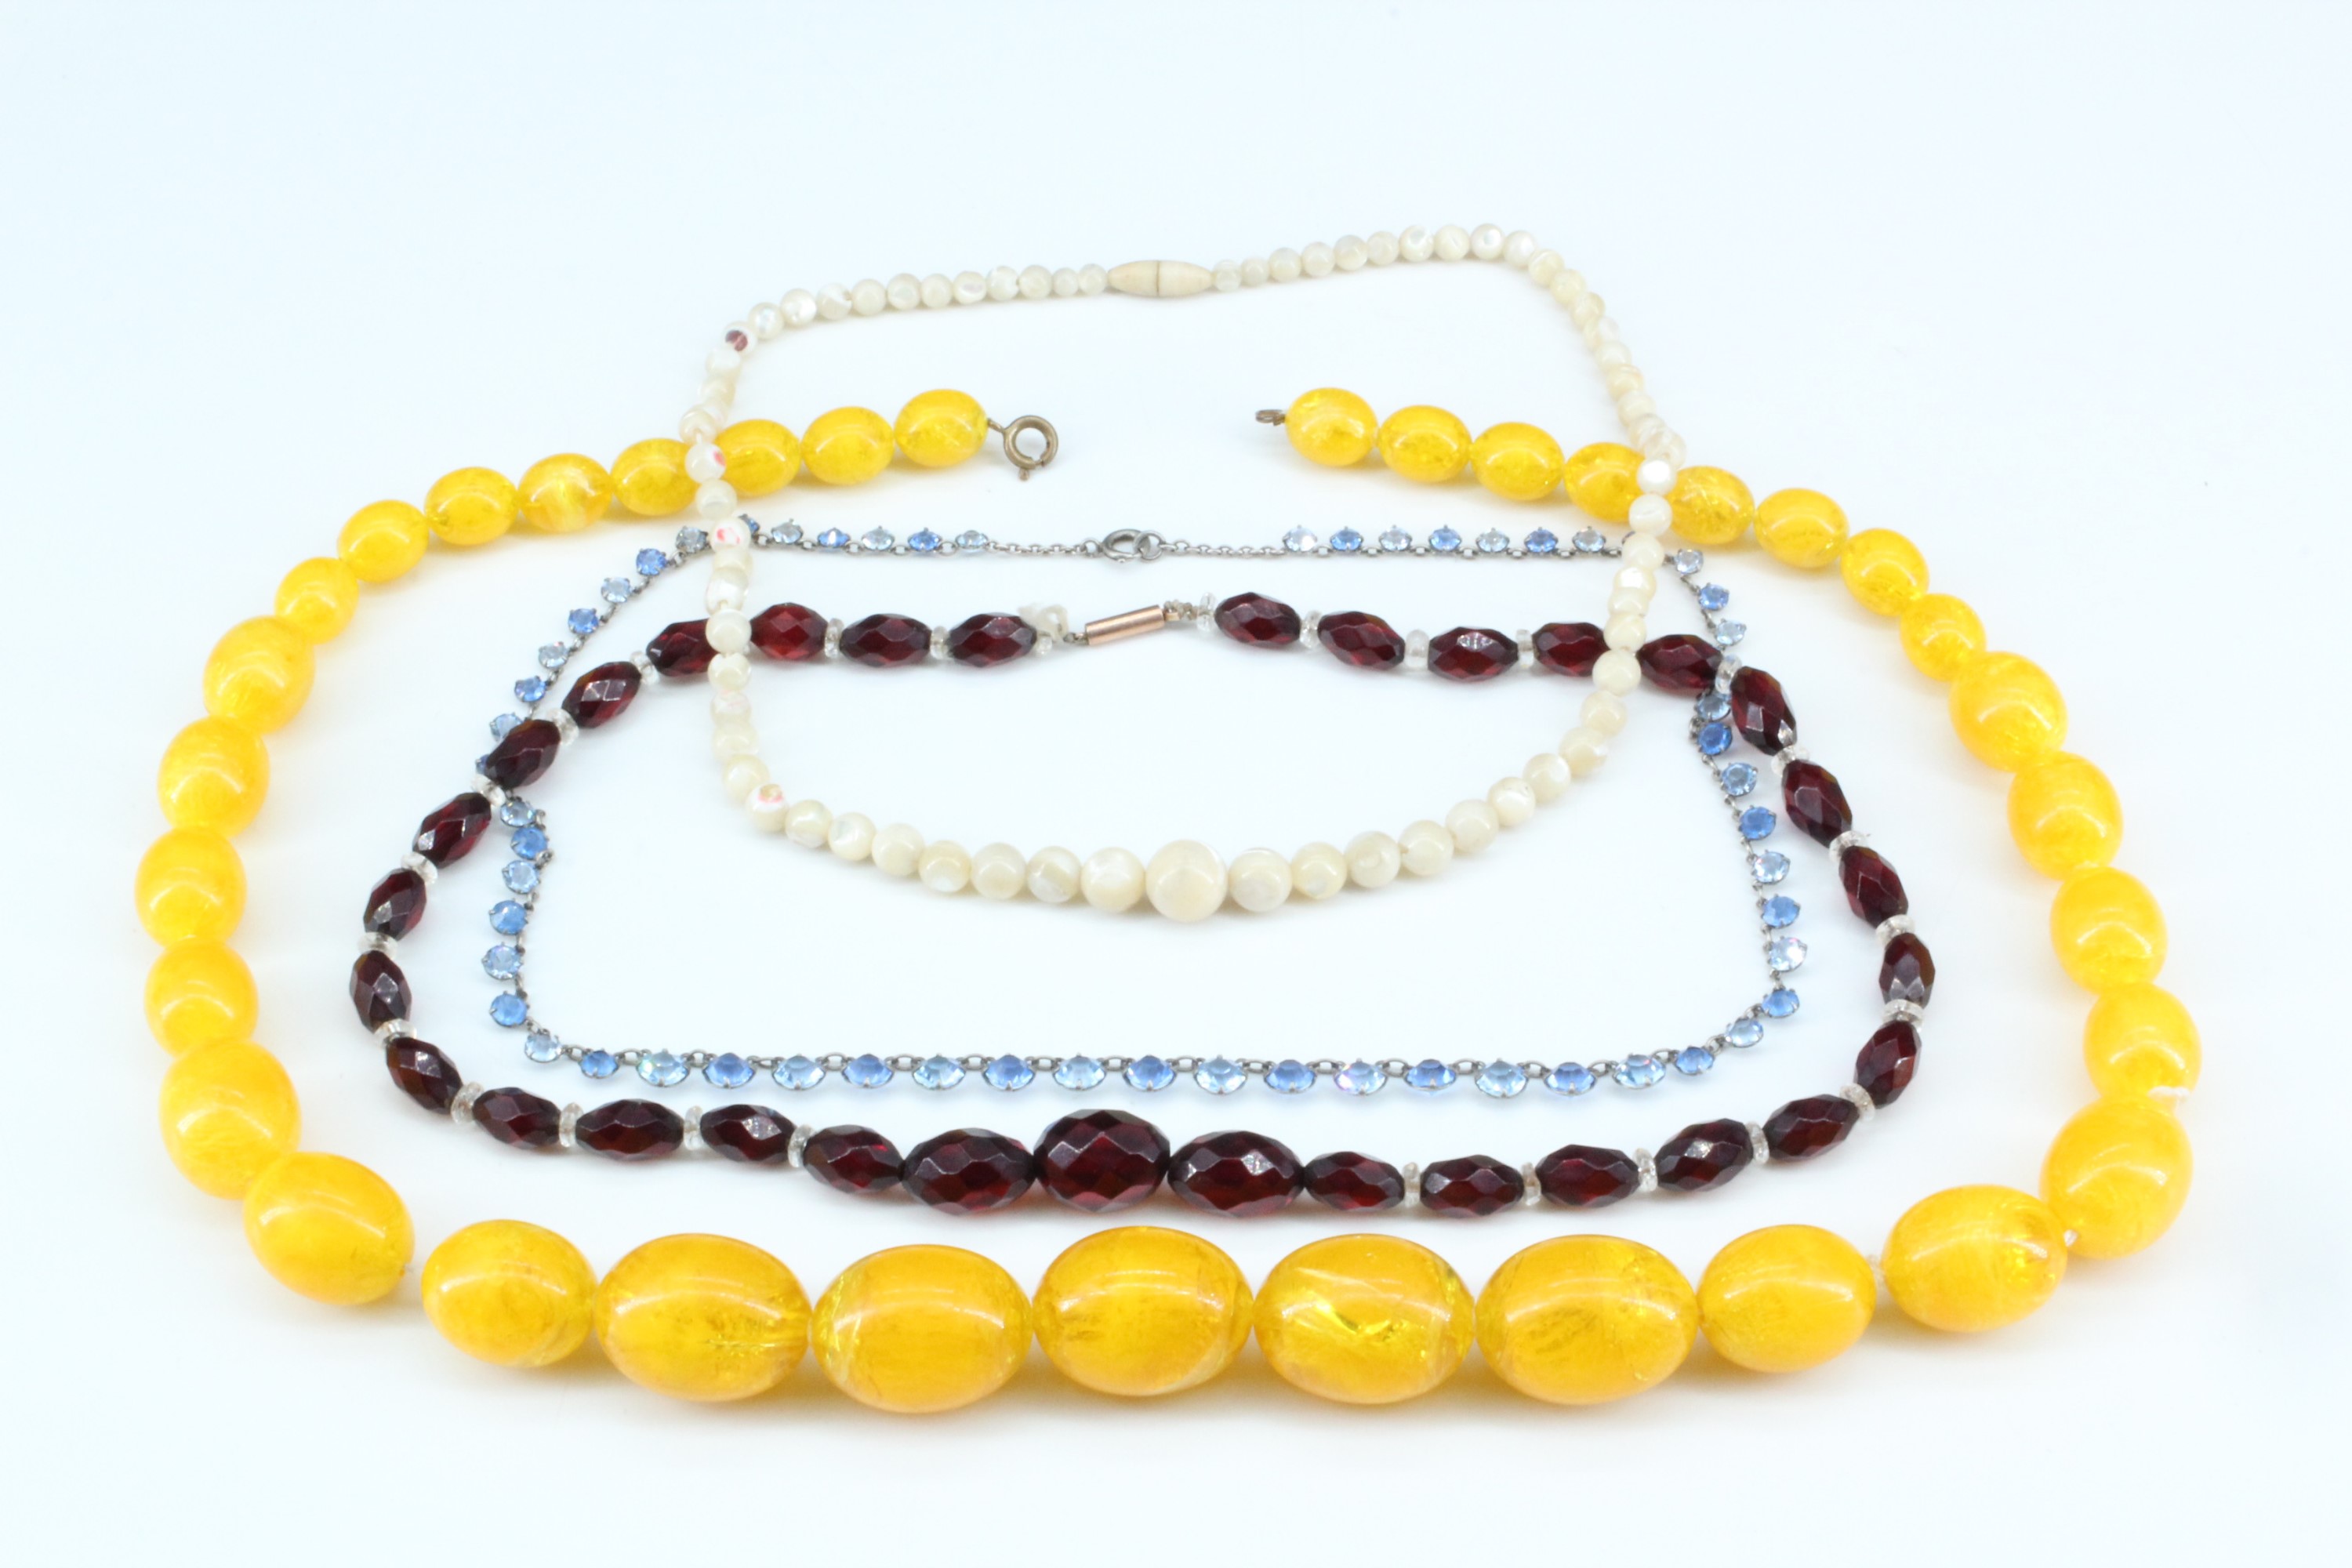 Two vintage faceted glass bead necklaces, a mother-of-pearl necklace and another of amber coloured